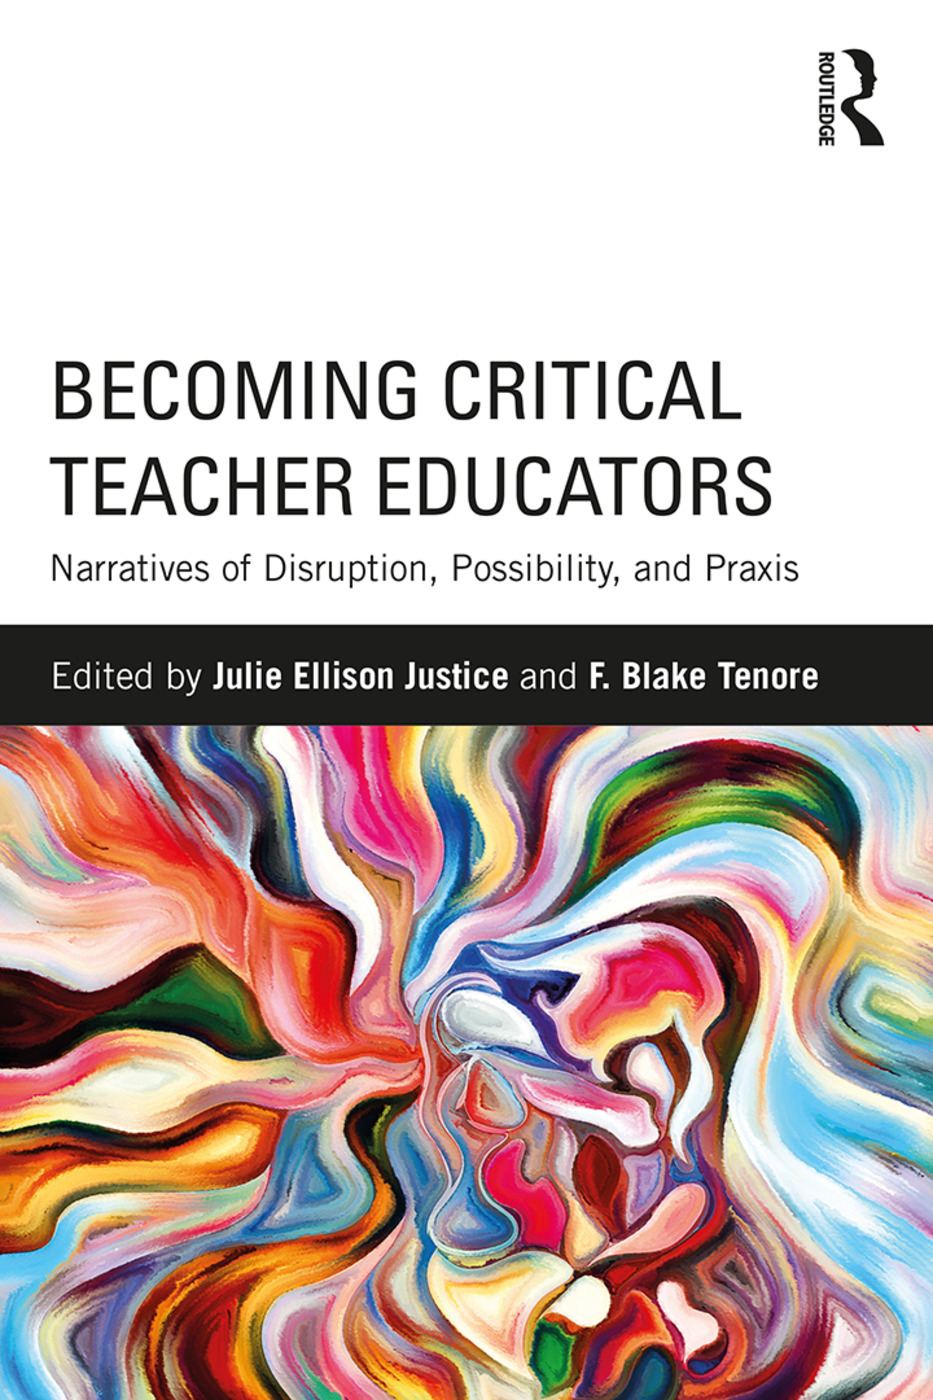 Becoming critical teacher educators : narratives of disruption, possibility, and praxis